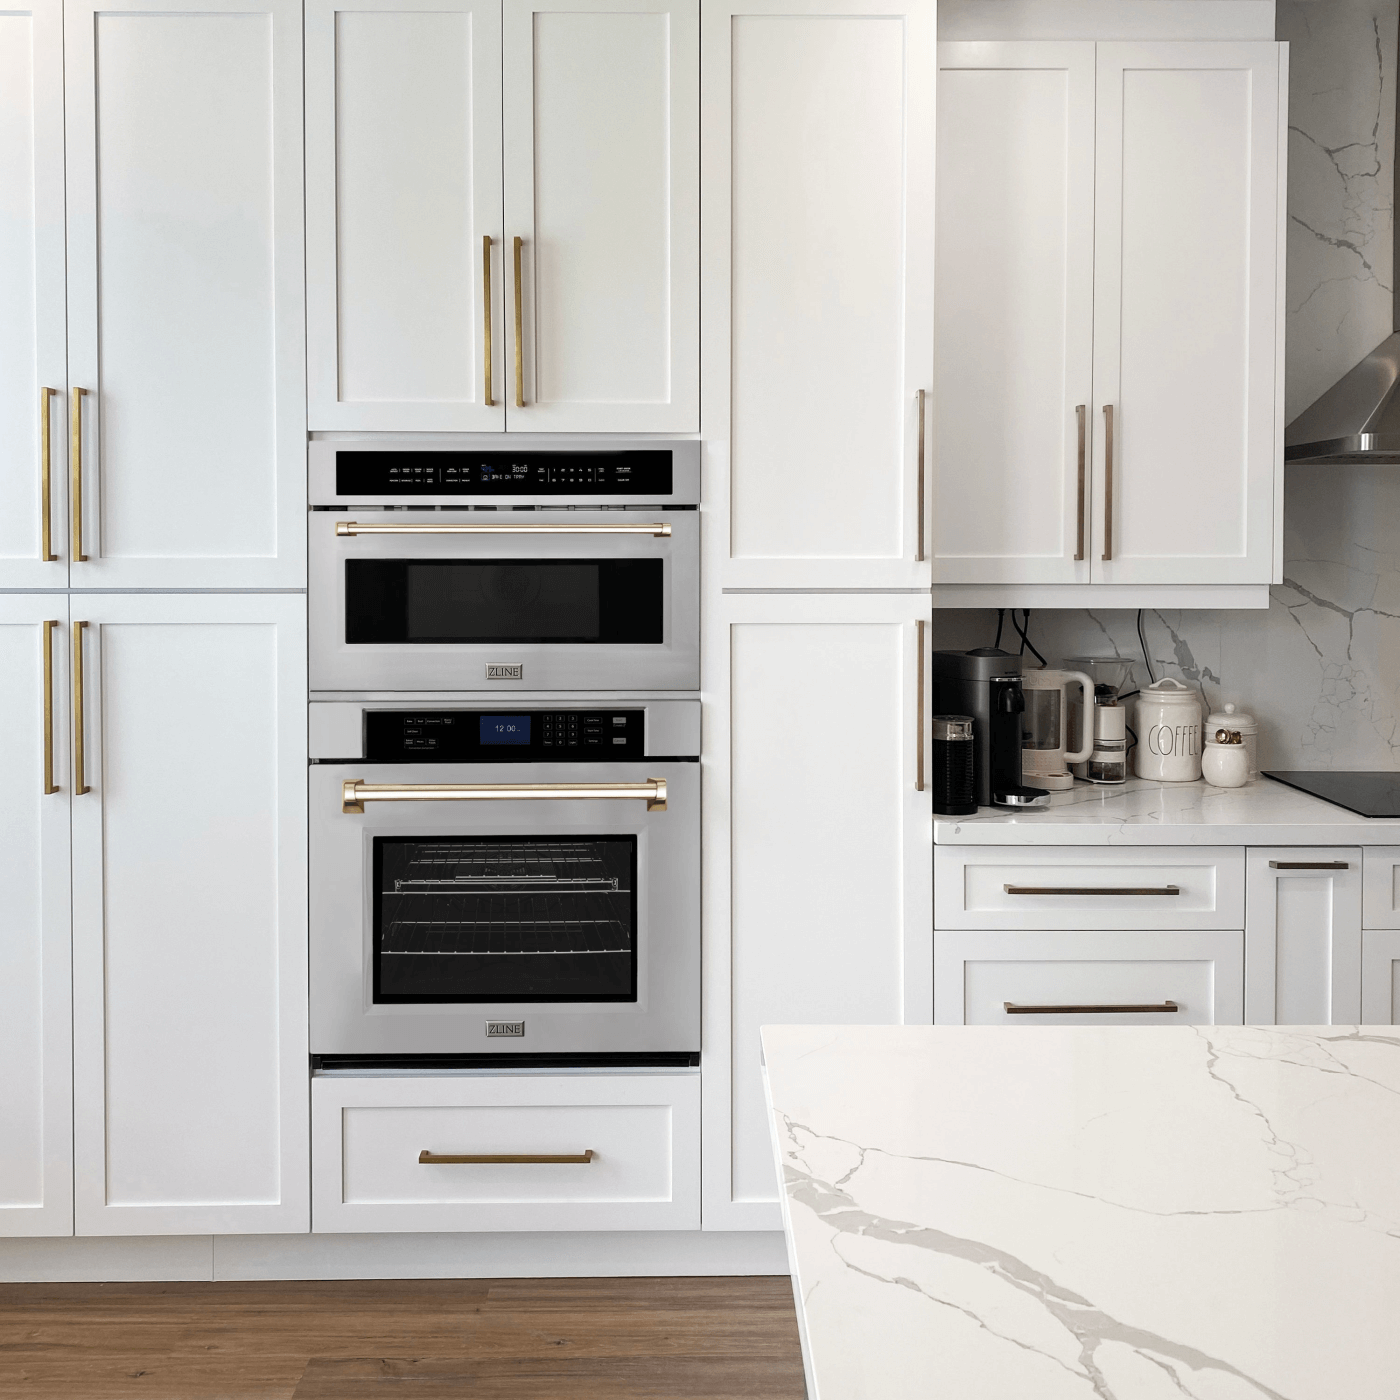 ZLINE Double Wall Oven in Stainless Steel with Gold Handles - installed in a white kitchen with matching hardware on cabinets